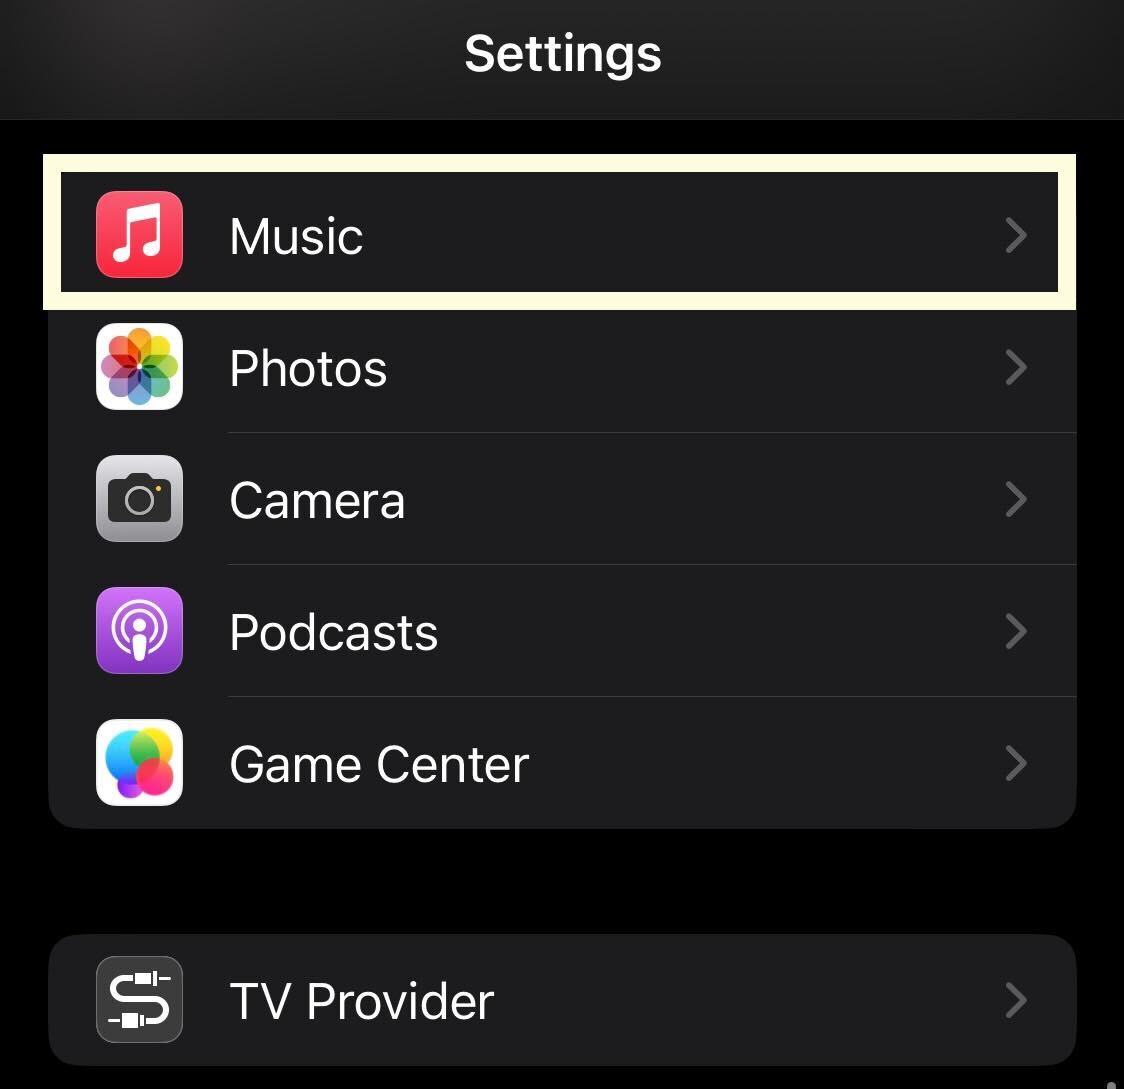 Music button in iOS settings